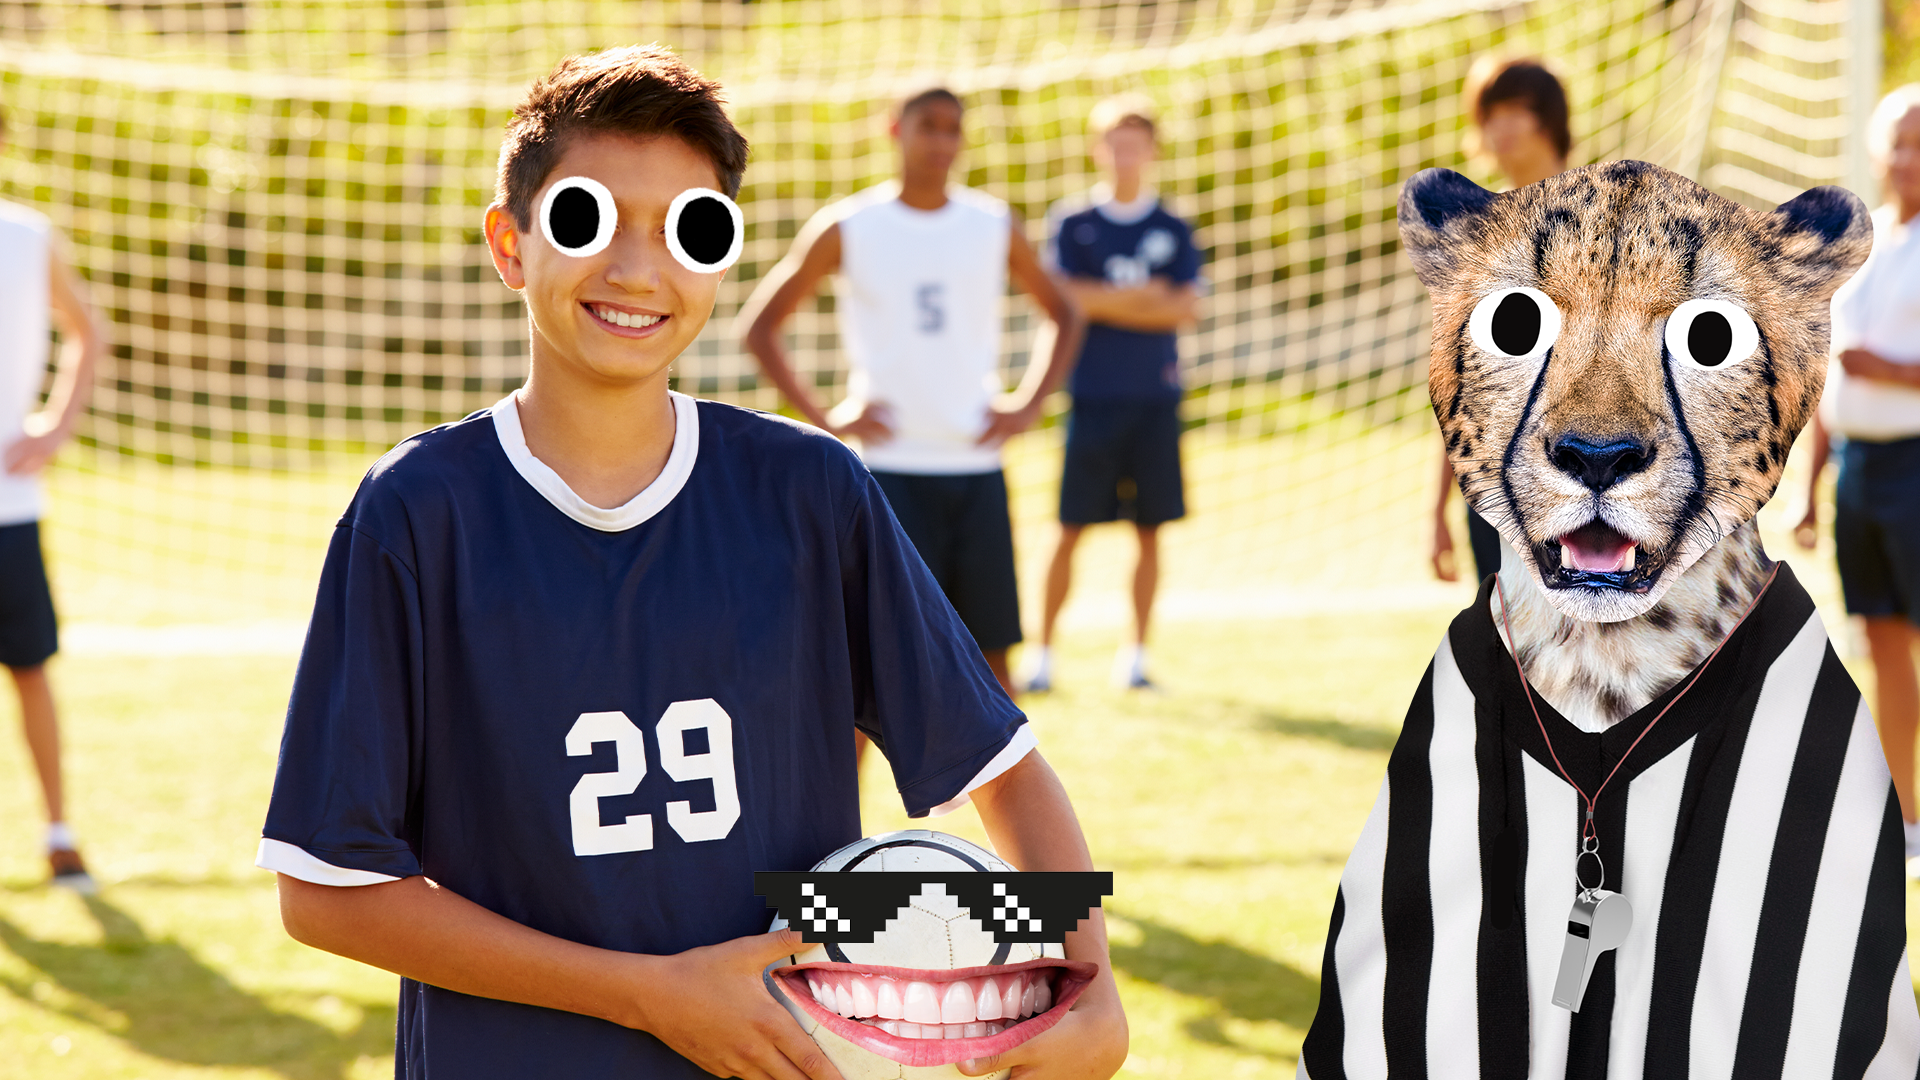 Smiling boy on football field with goofy football and referee cheetah 